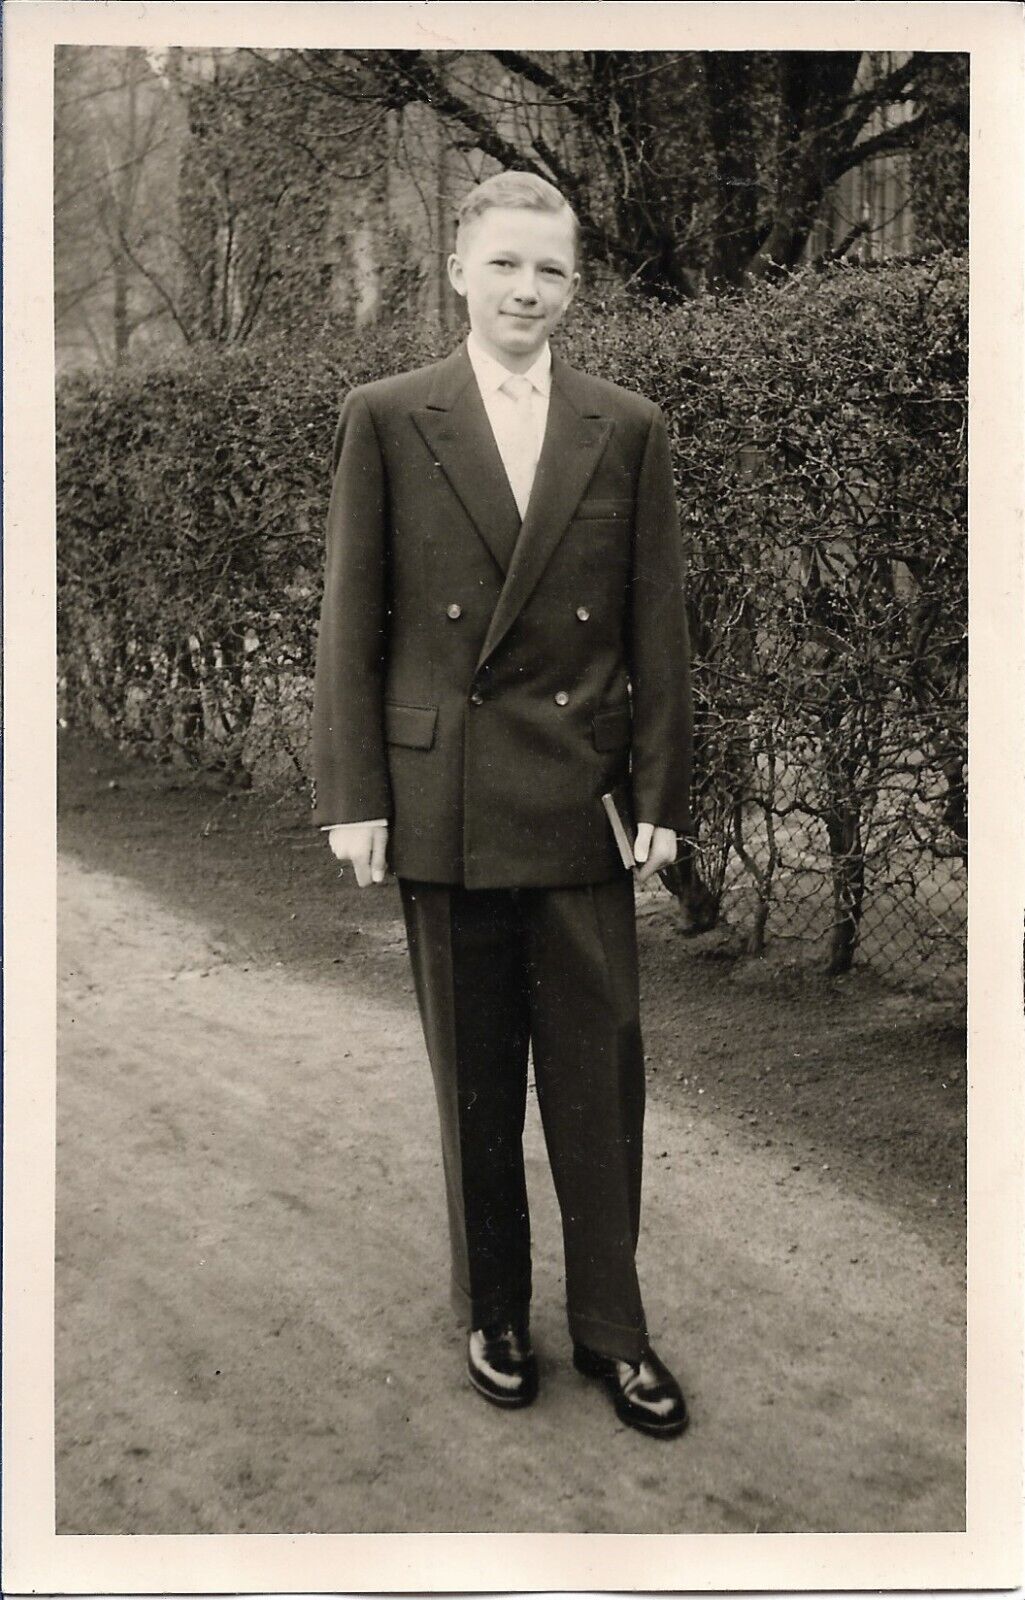 Young Man In Suit Photograph Vintage 1930s RPPC Outdoors 3 1/2 x 5 1/2